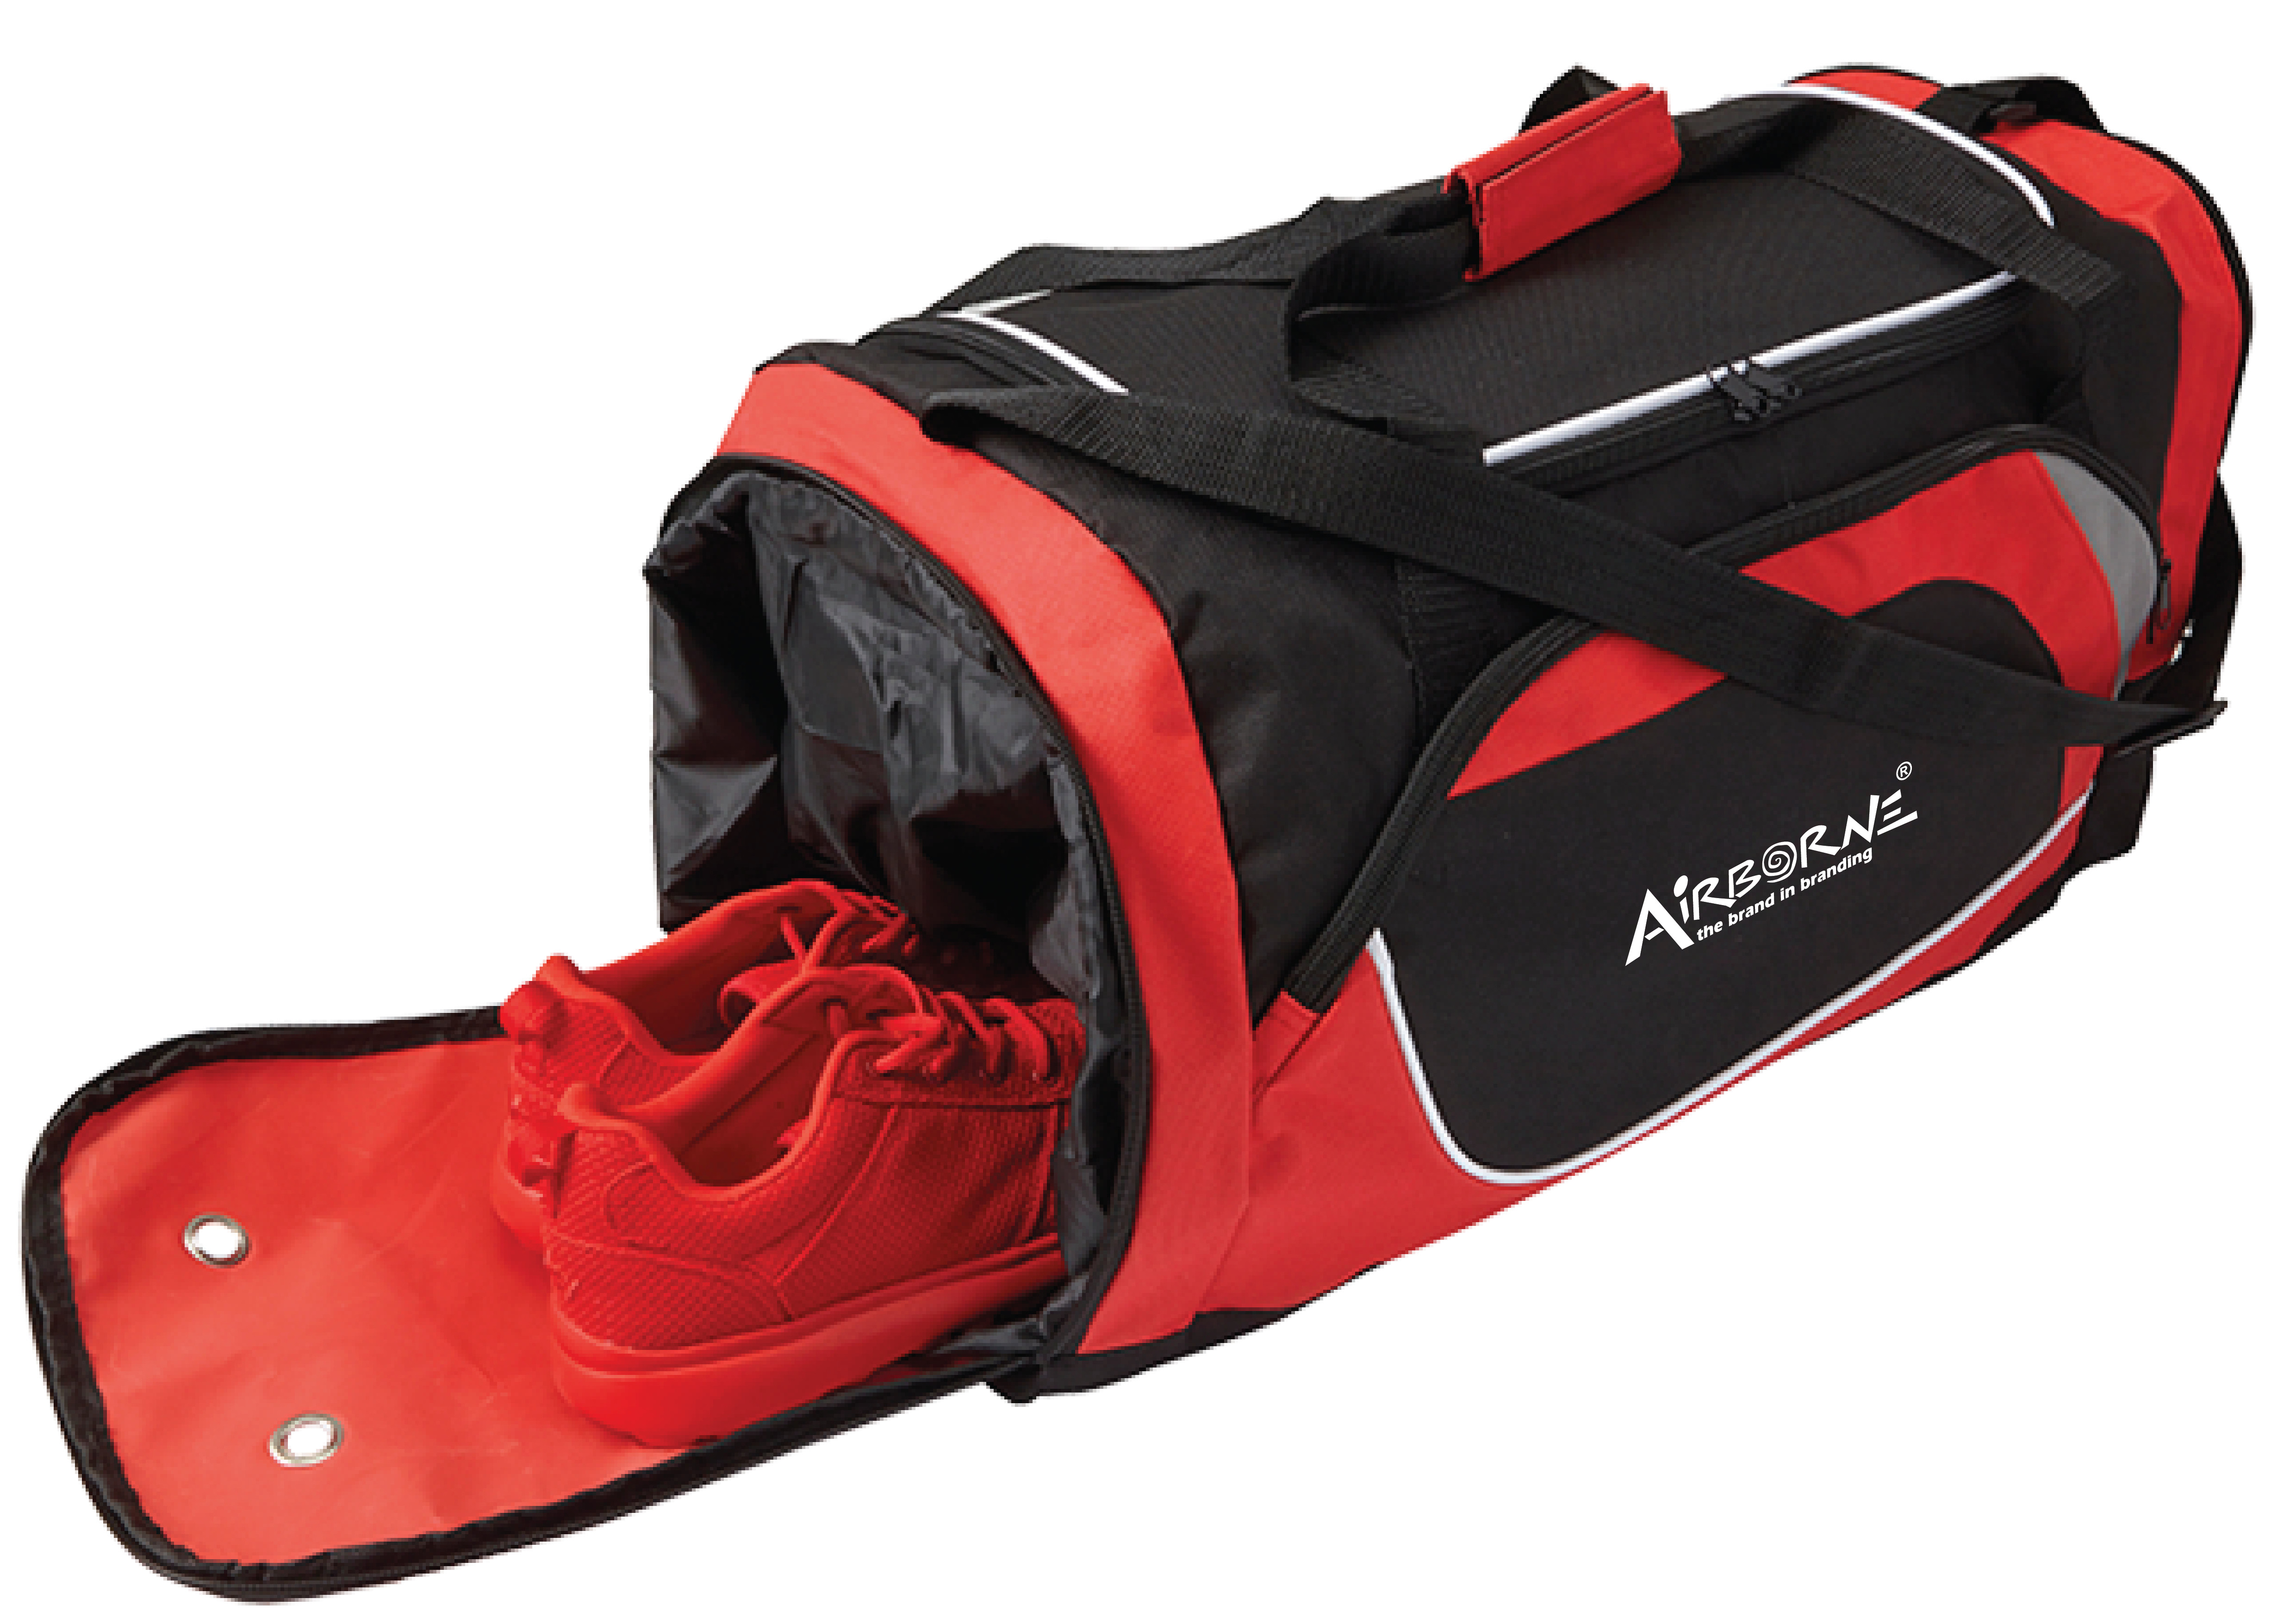 Sports Bag With Shoe Compartment Vajas Manufacturers Ltd